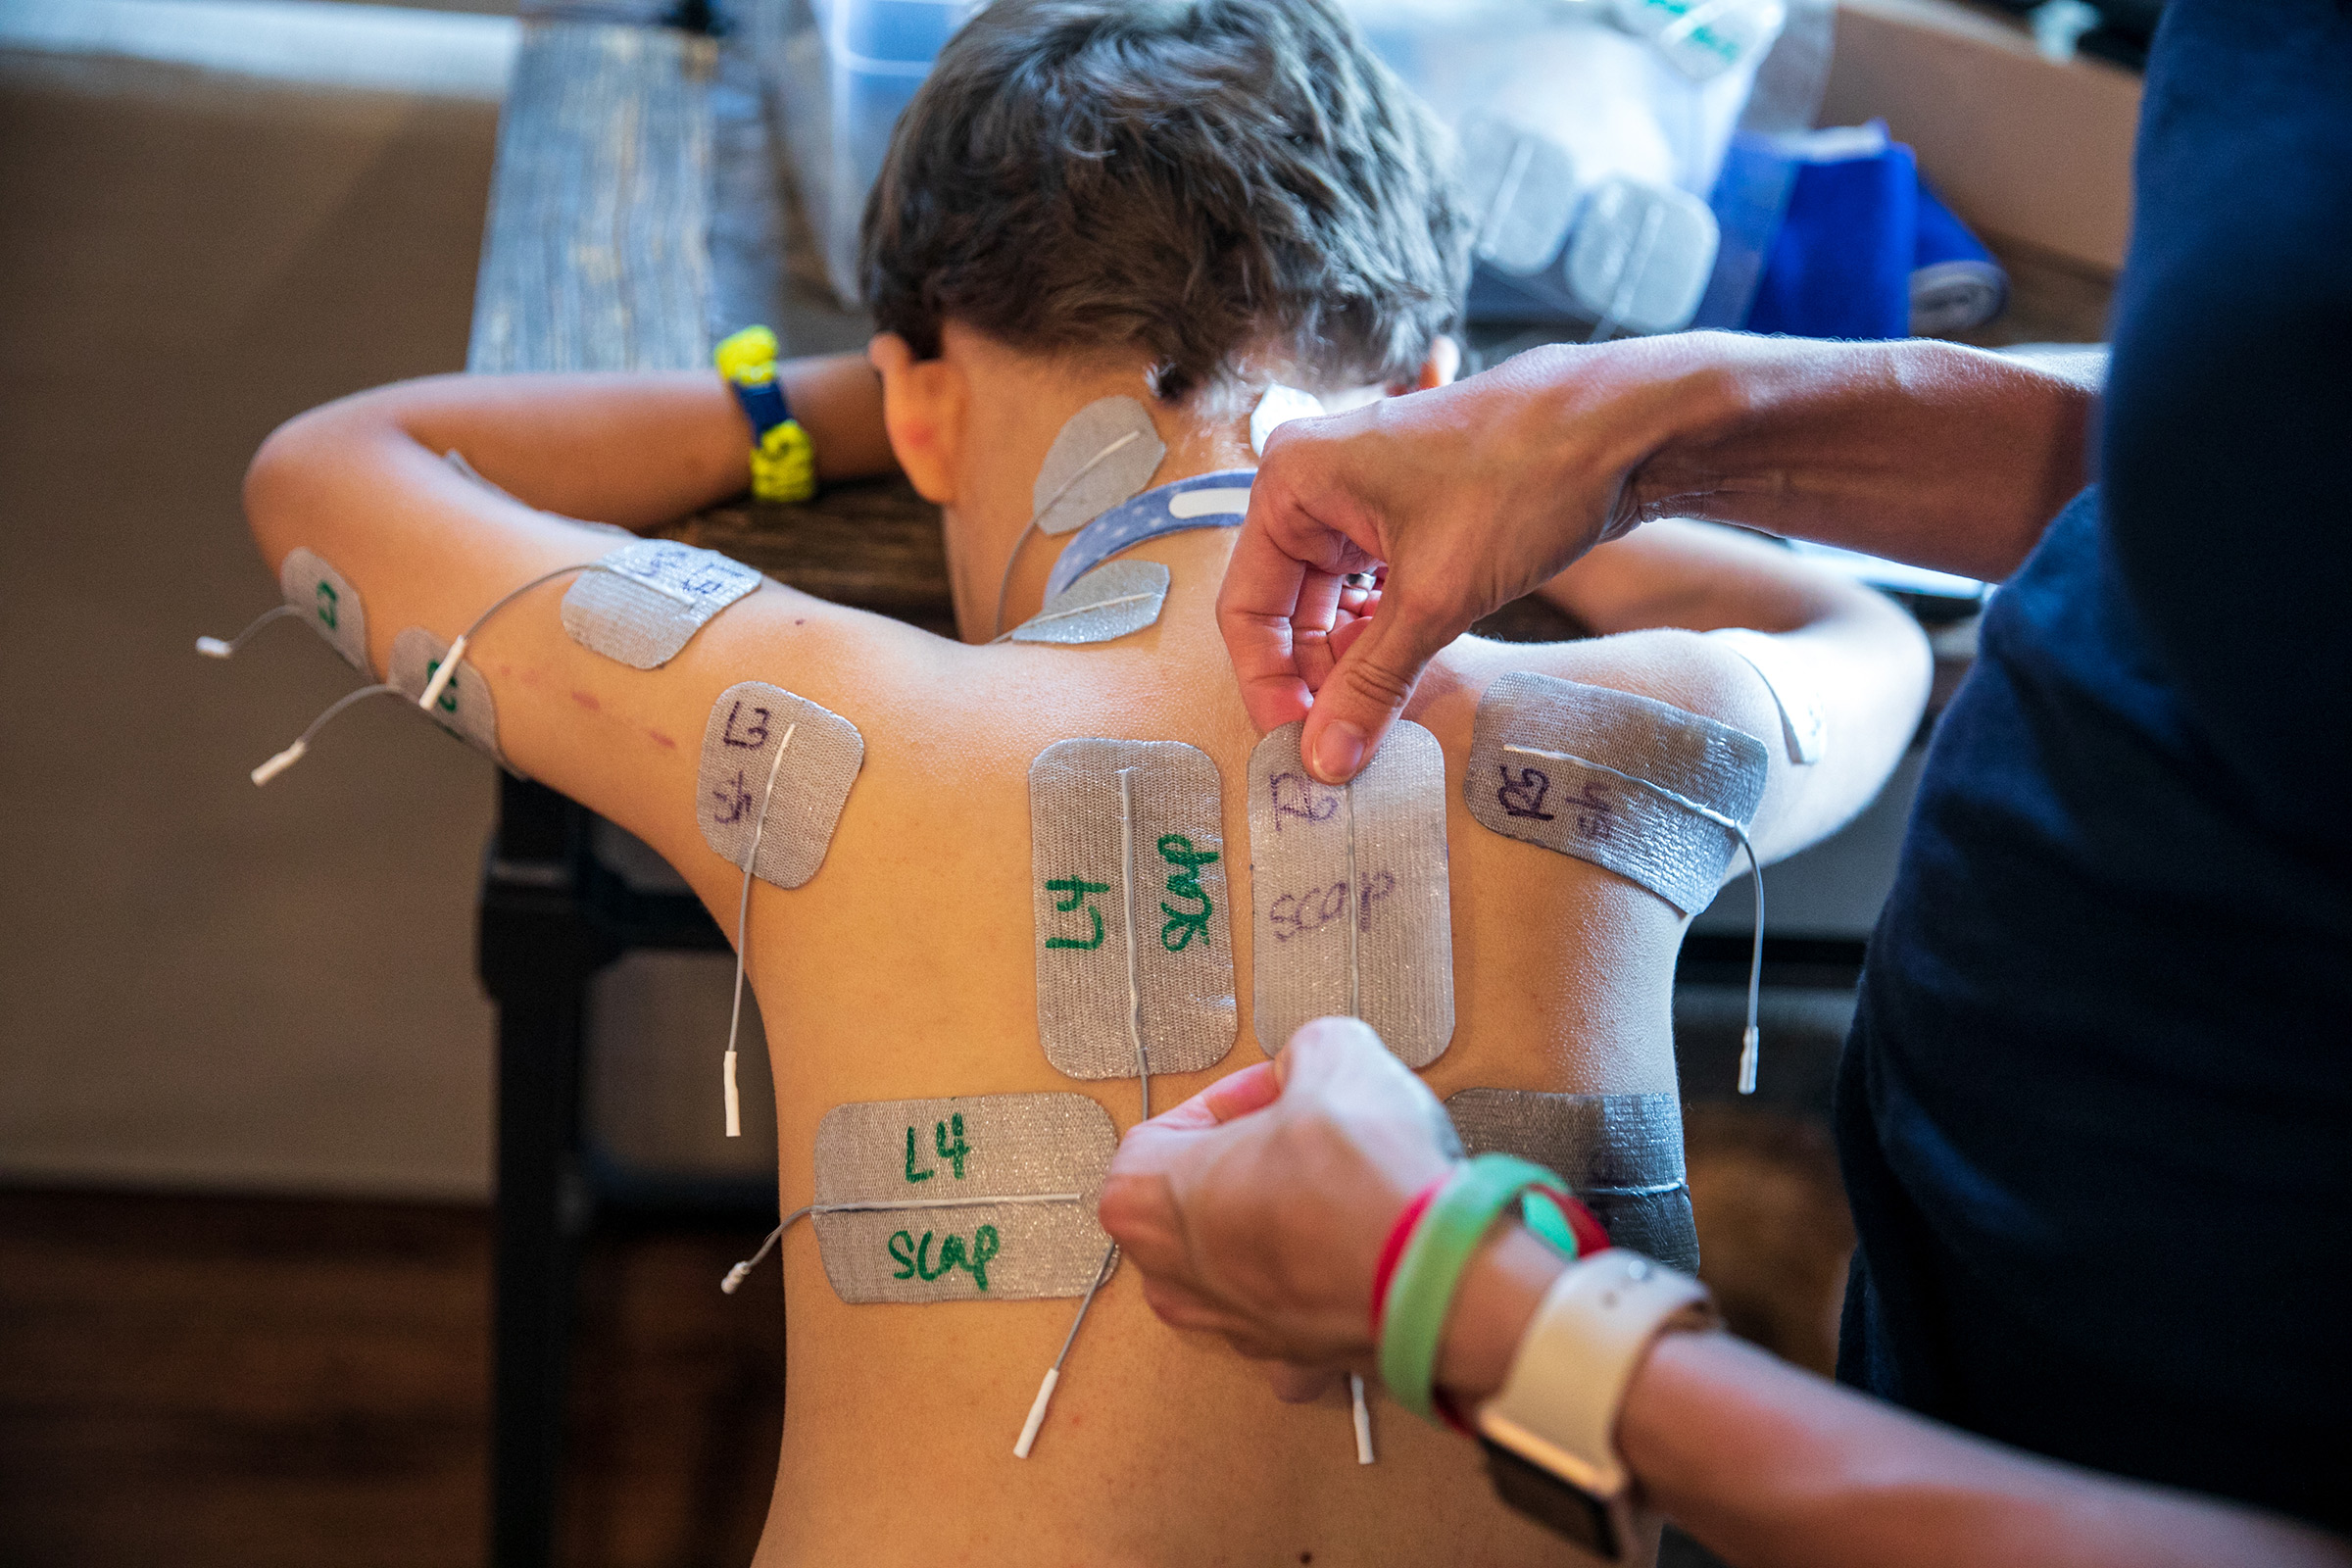 Muscle-stimulating pads are placed on Braden's back for treatment. (Ilana Panich-Linsman for TIME)